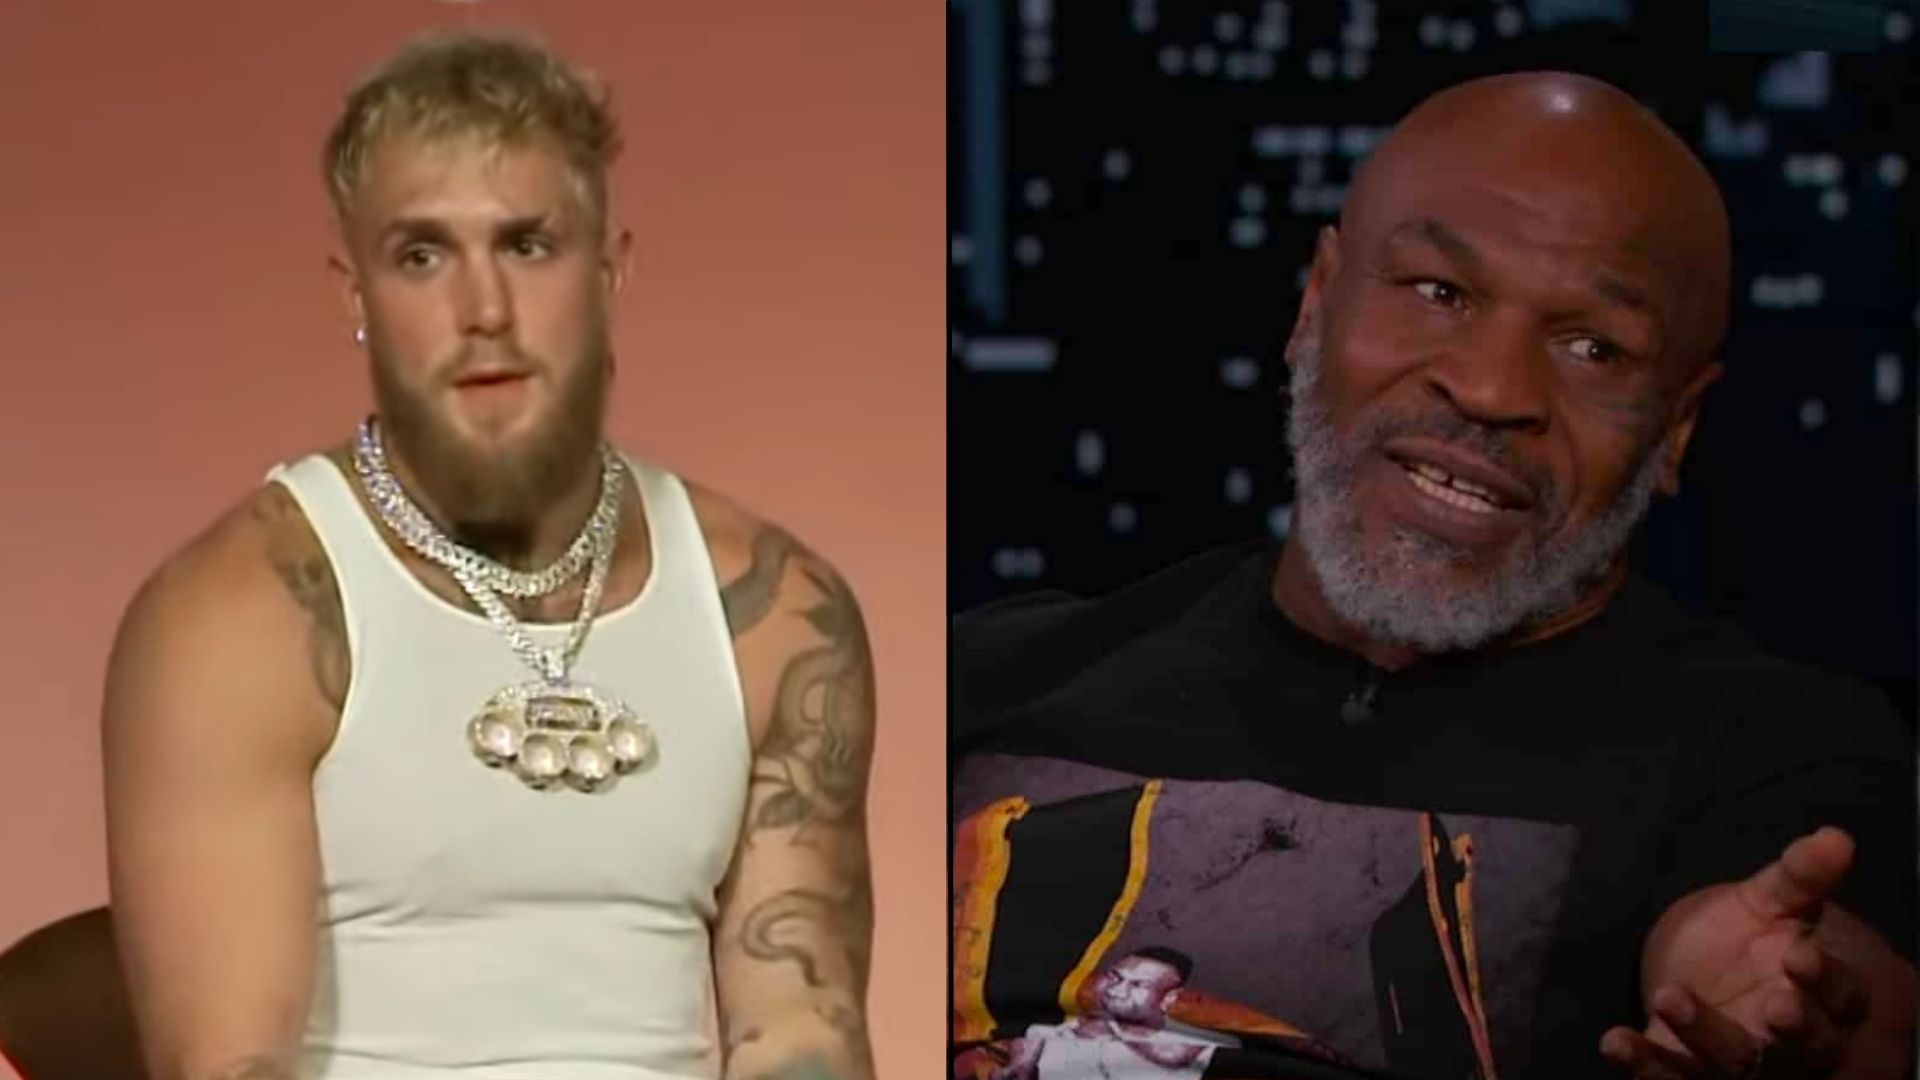 Jake Paul calls out Mike Tyson to make blockbuster fight happen - Dexerto